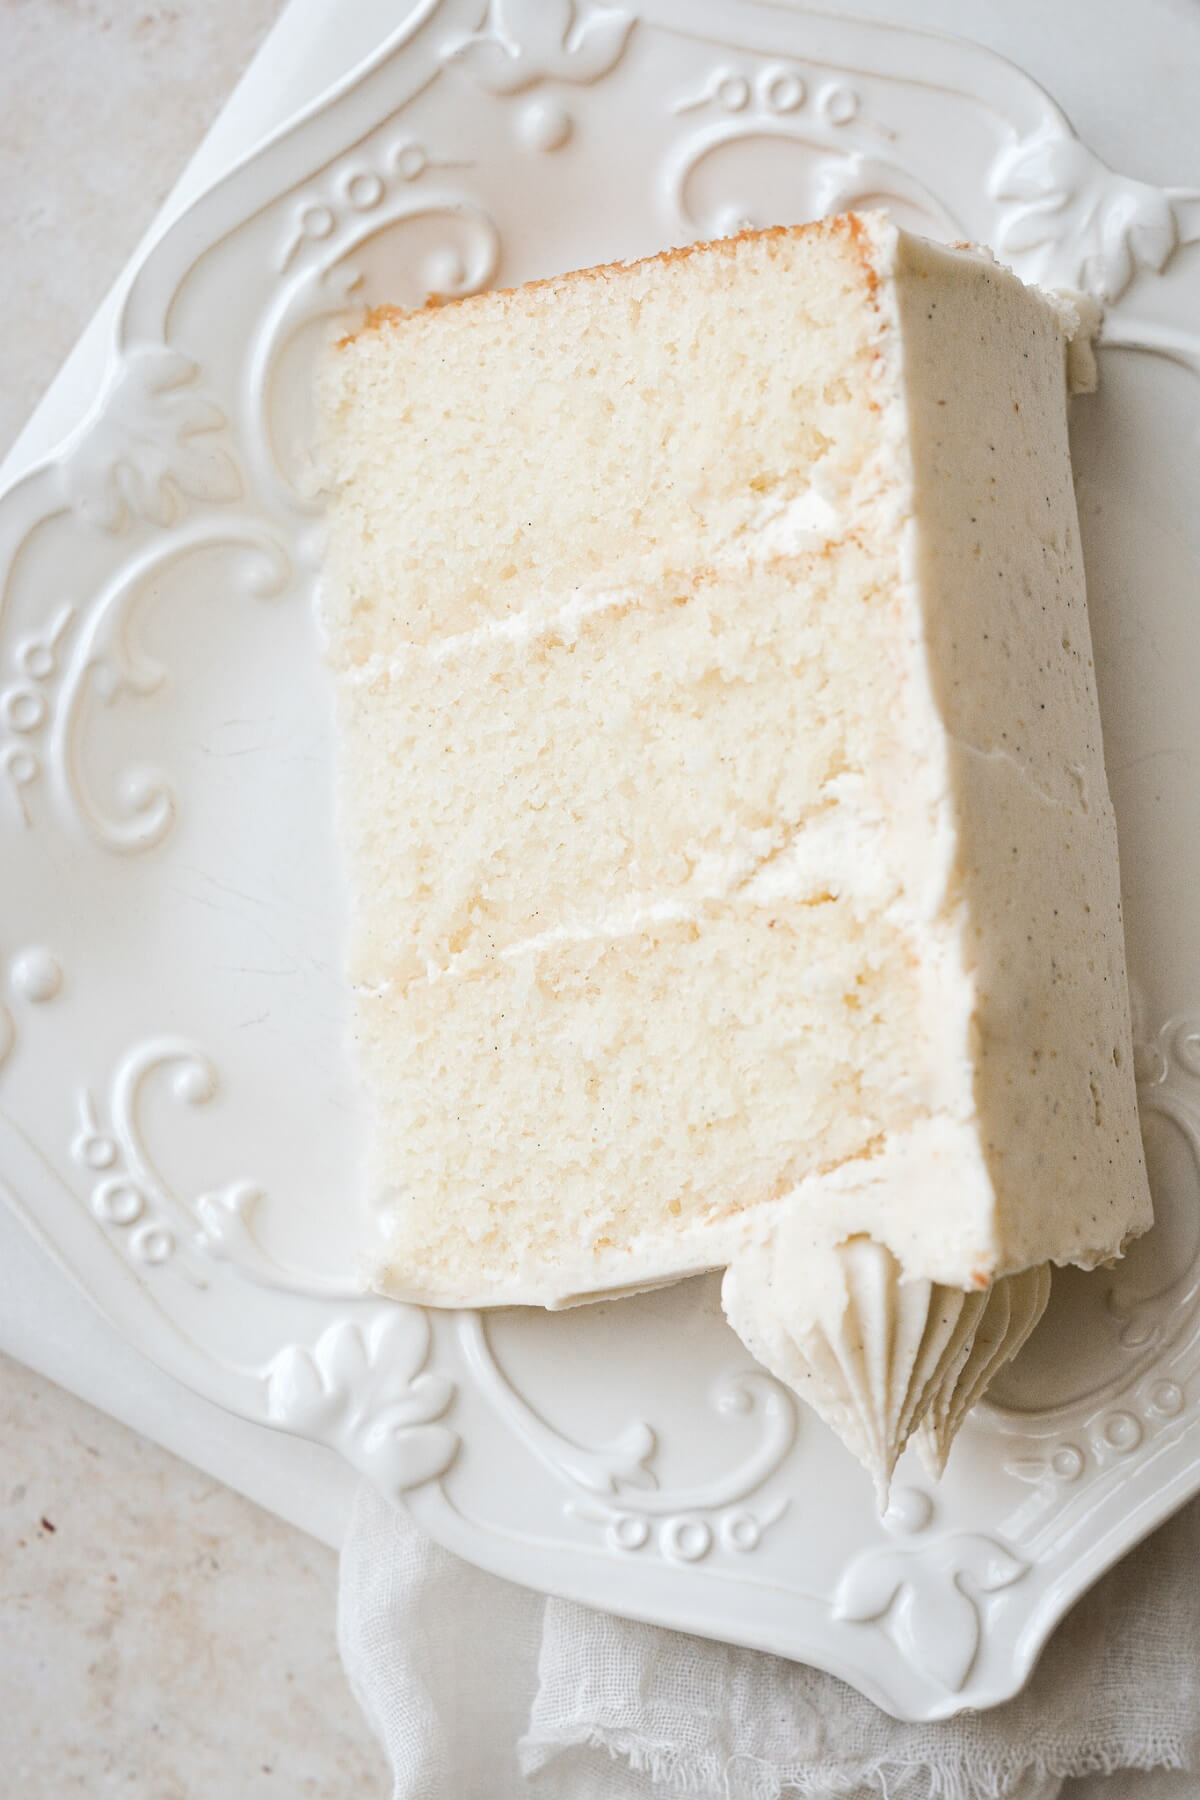 A slice of banana layer cake on a white plate.